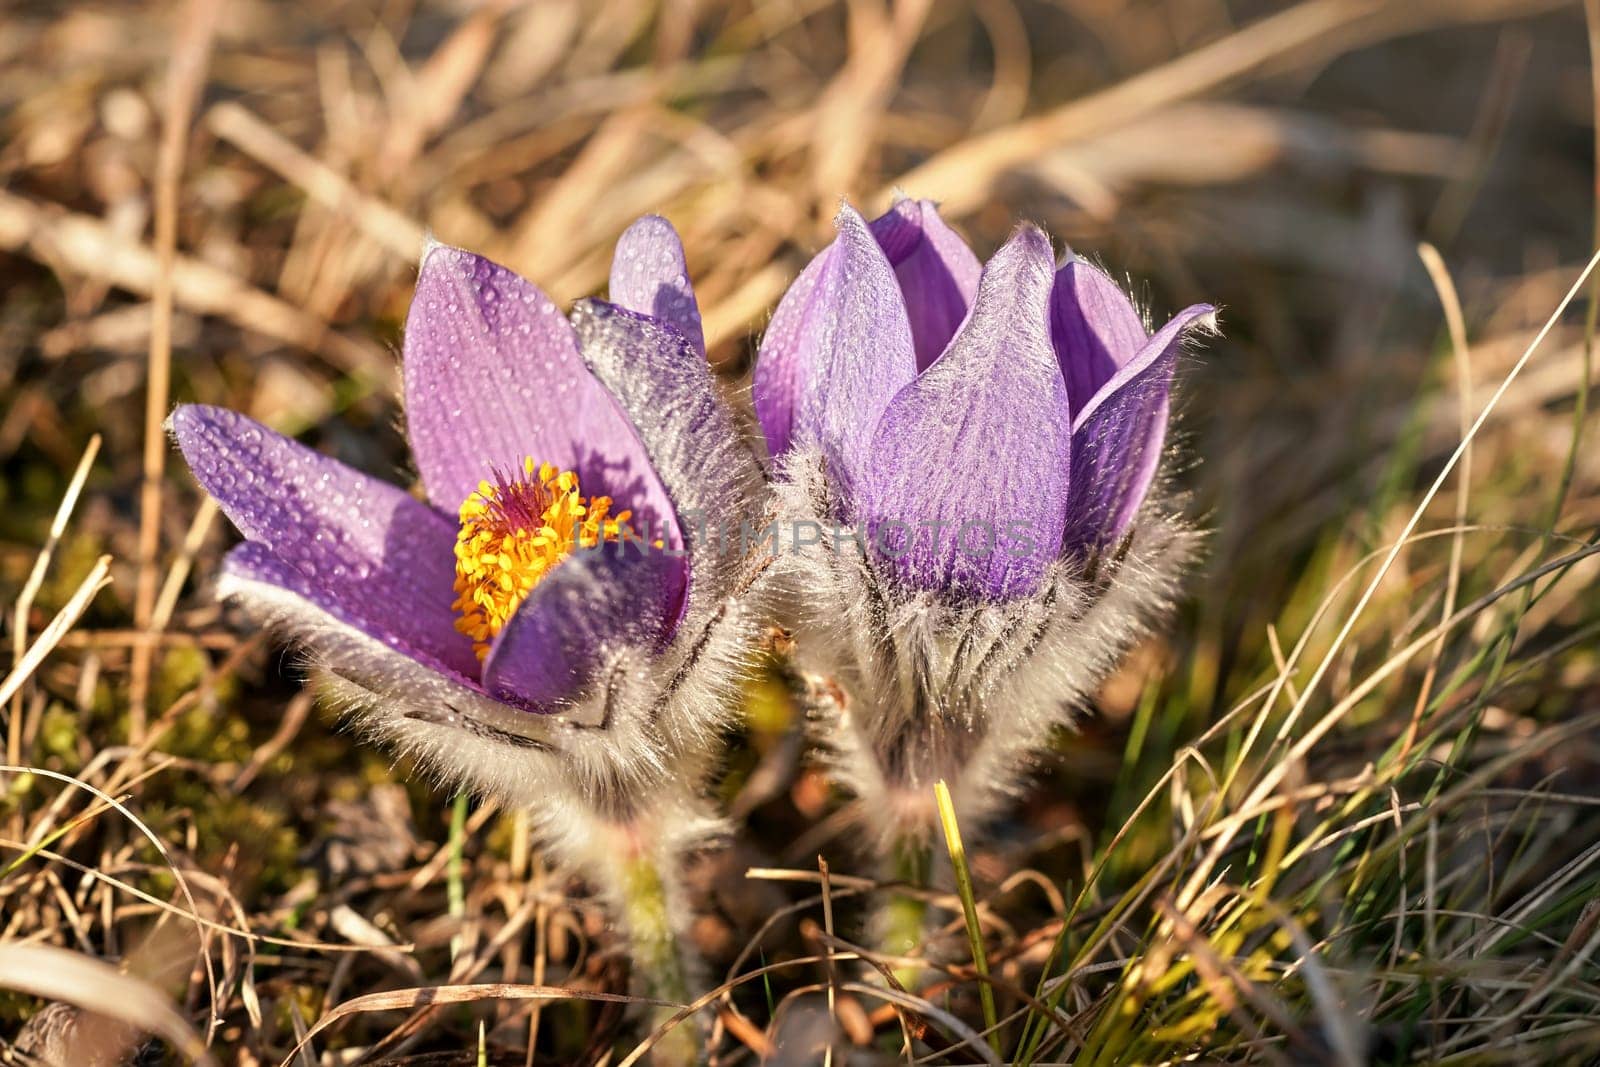 Purple greater pasque flower - Pulsatilla grandis - growing in dry grass, sun shines on water drops and lilac coloured petals by Ivanko